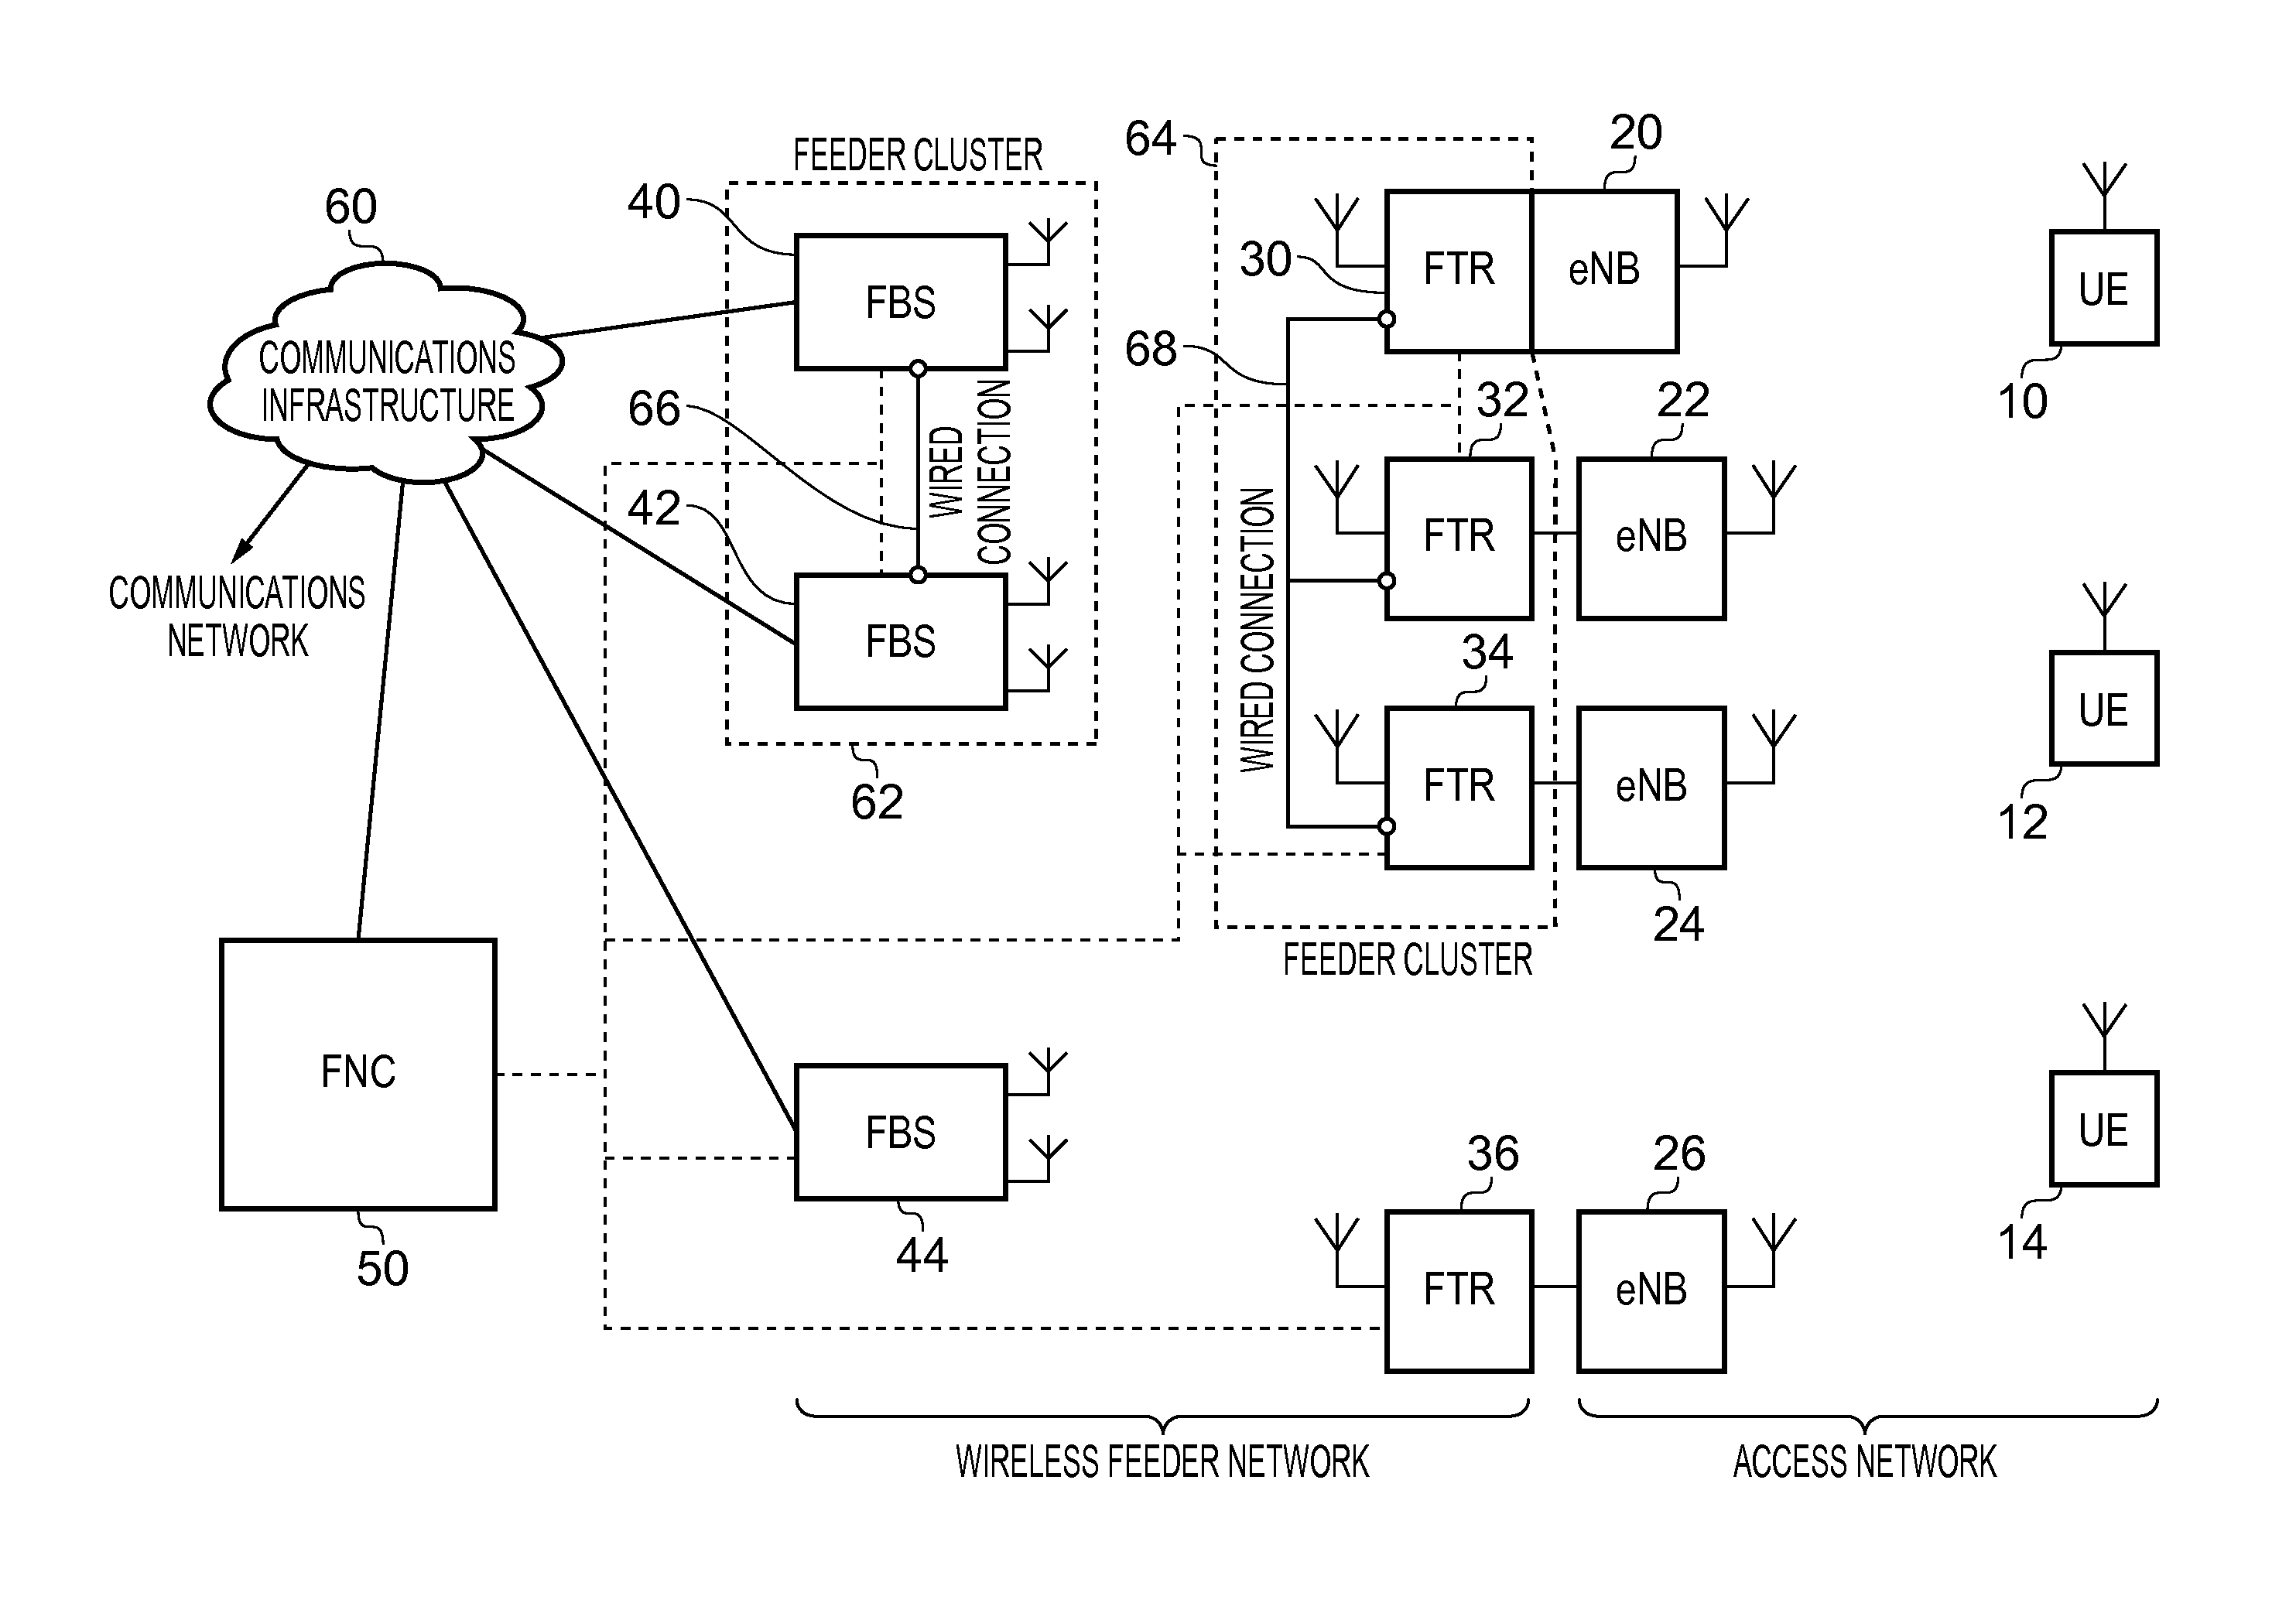 Cooperative Components in a Wireless Feeder Network